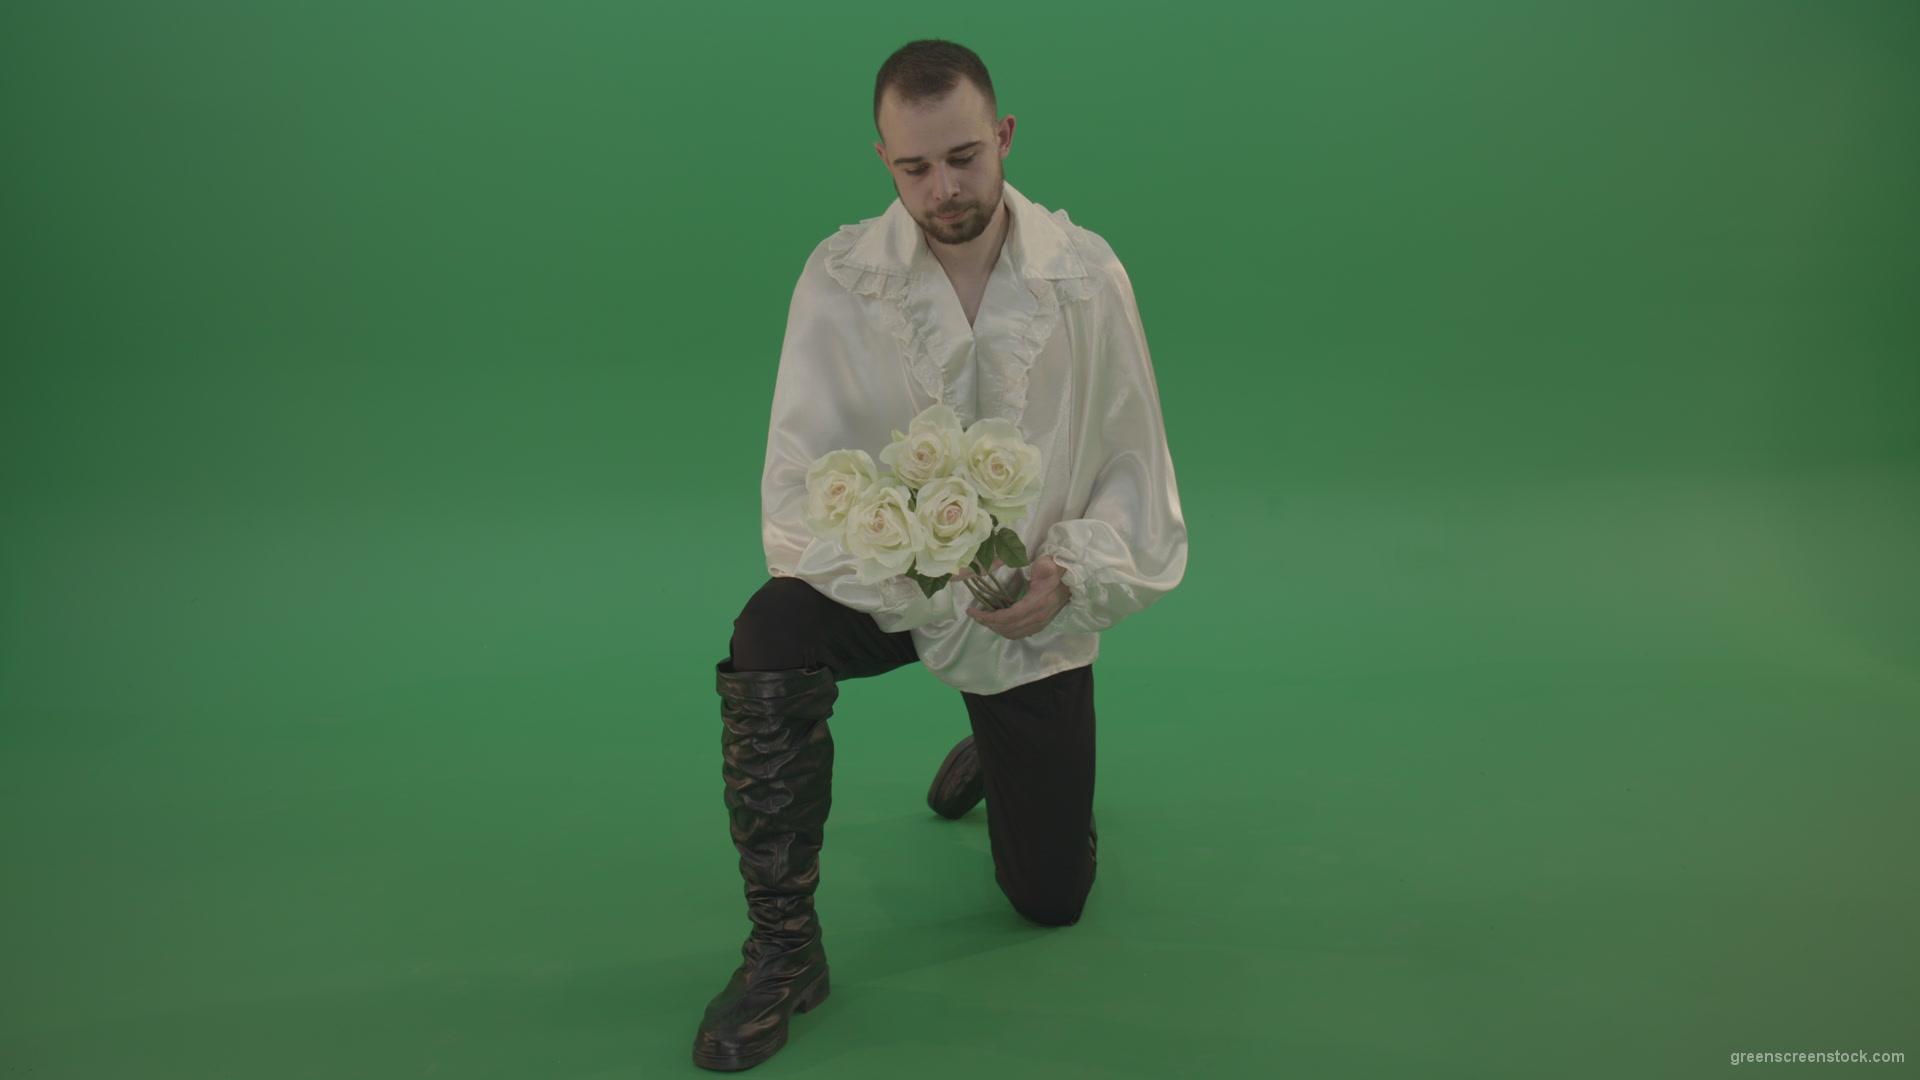 Medieval-man-gives-white-flowers-standing-on-one-knee-isolated-in-green-screen-studio_001 Green Screen Stock